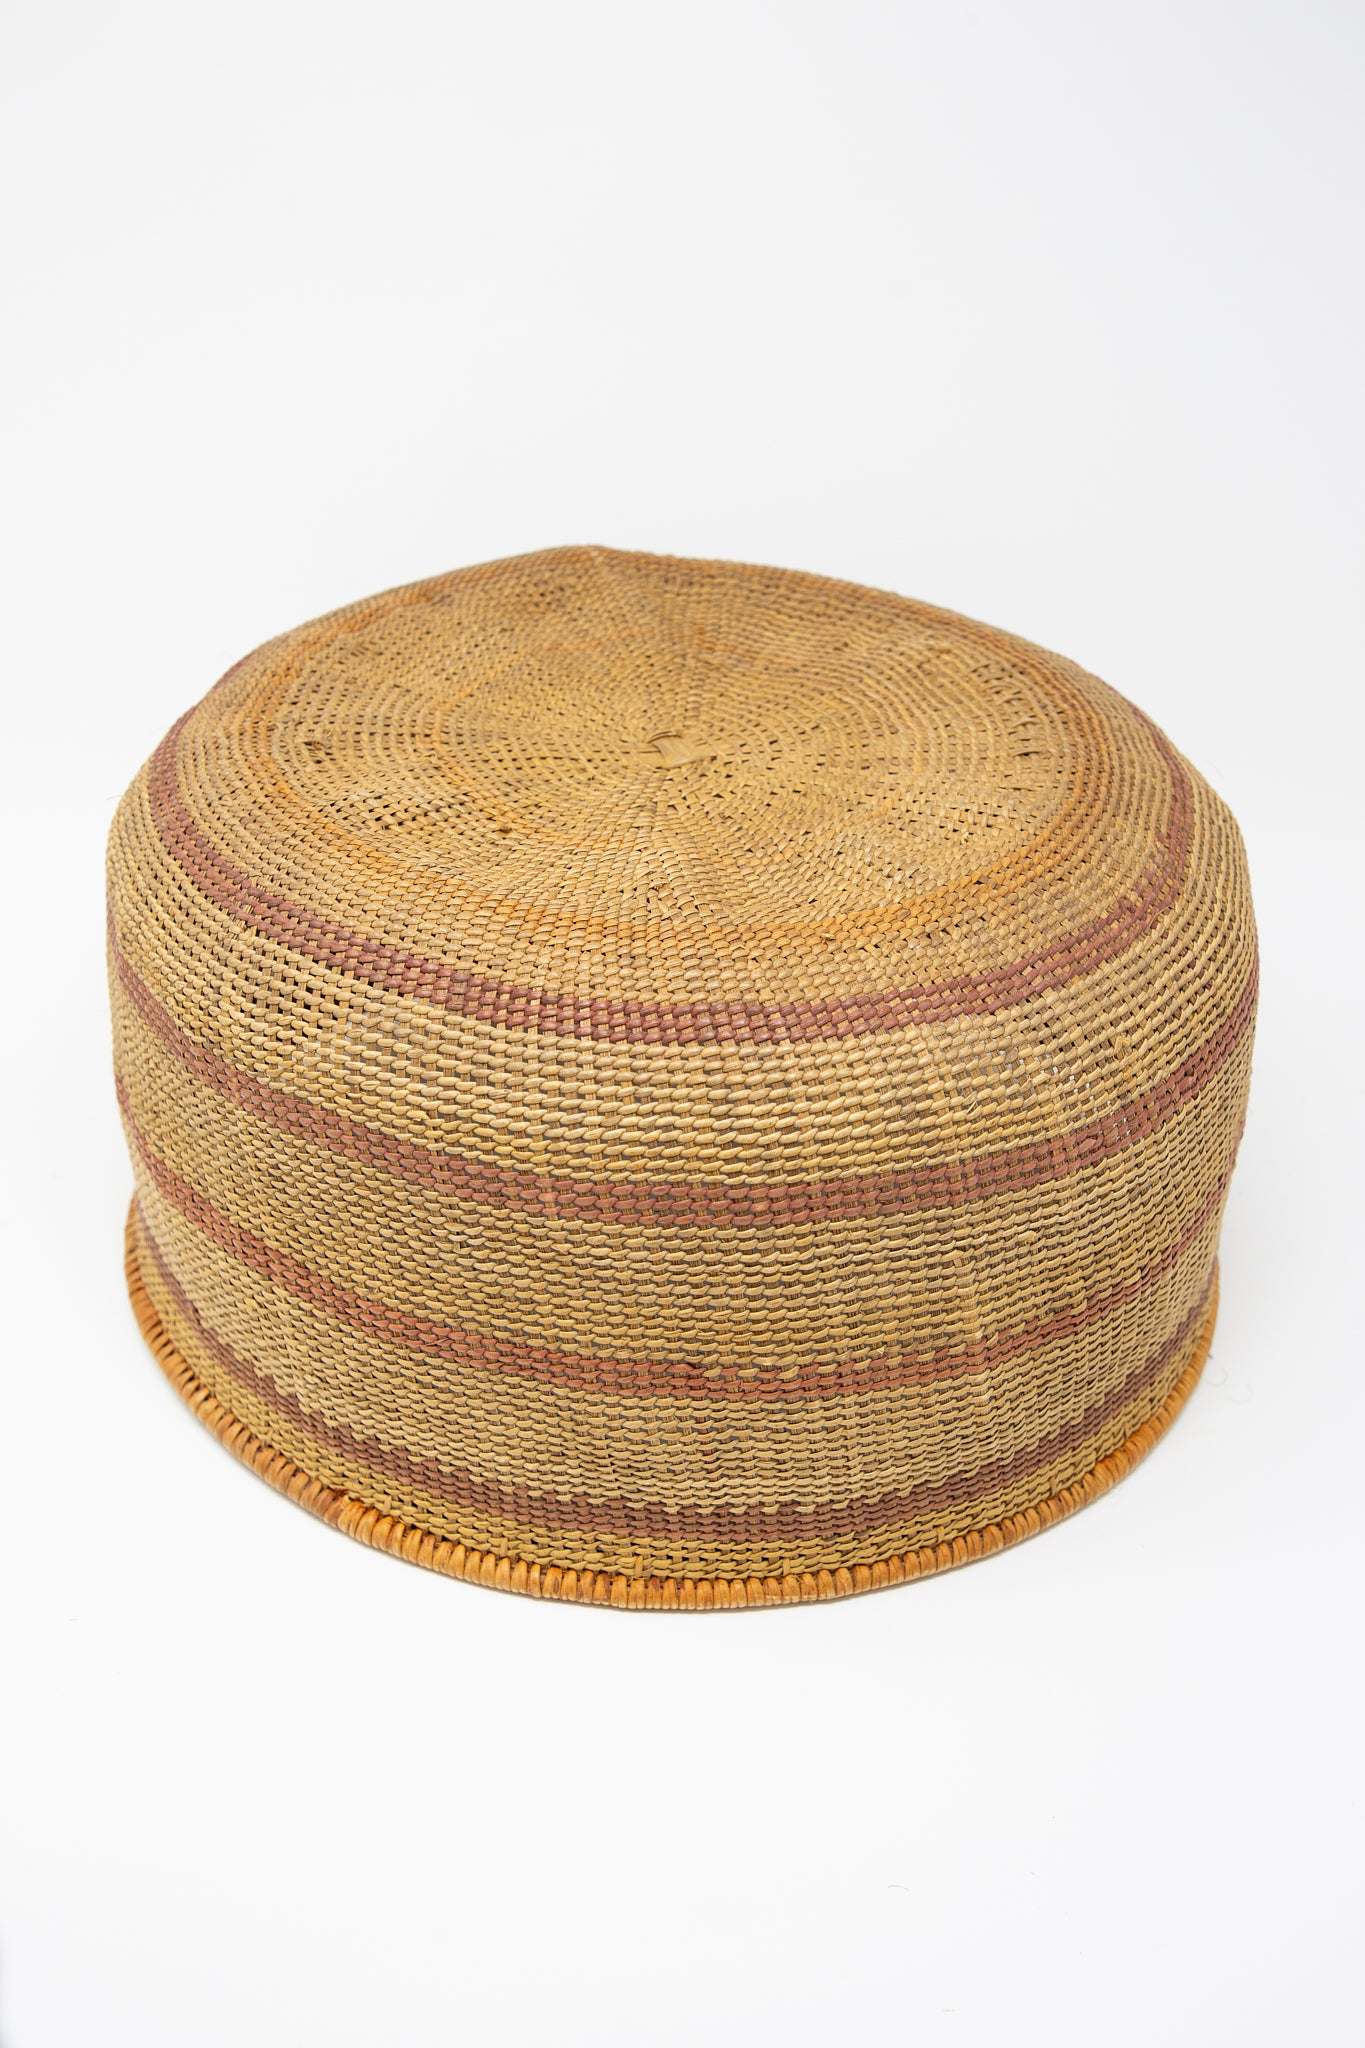 An XL Nukak Makú Basket woven using traditional basket weaving techniques on a white background, by Plaza Bolivar. Up side down view.